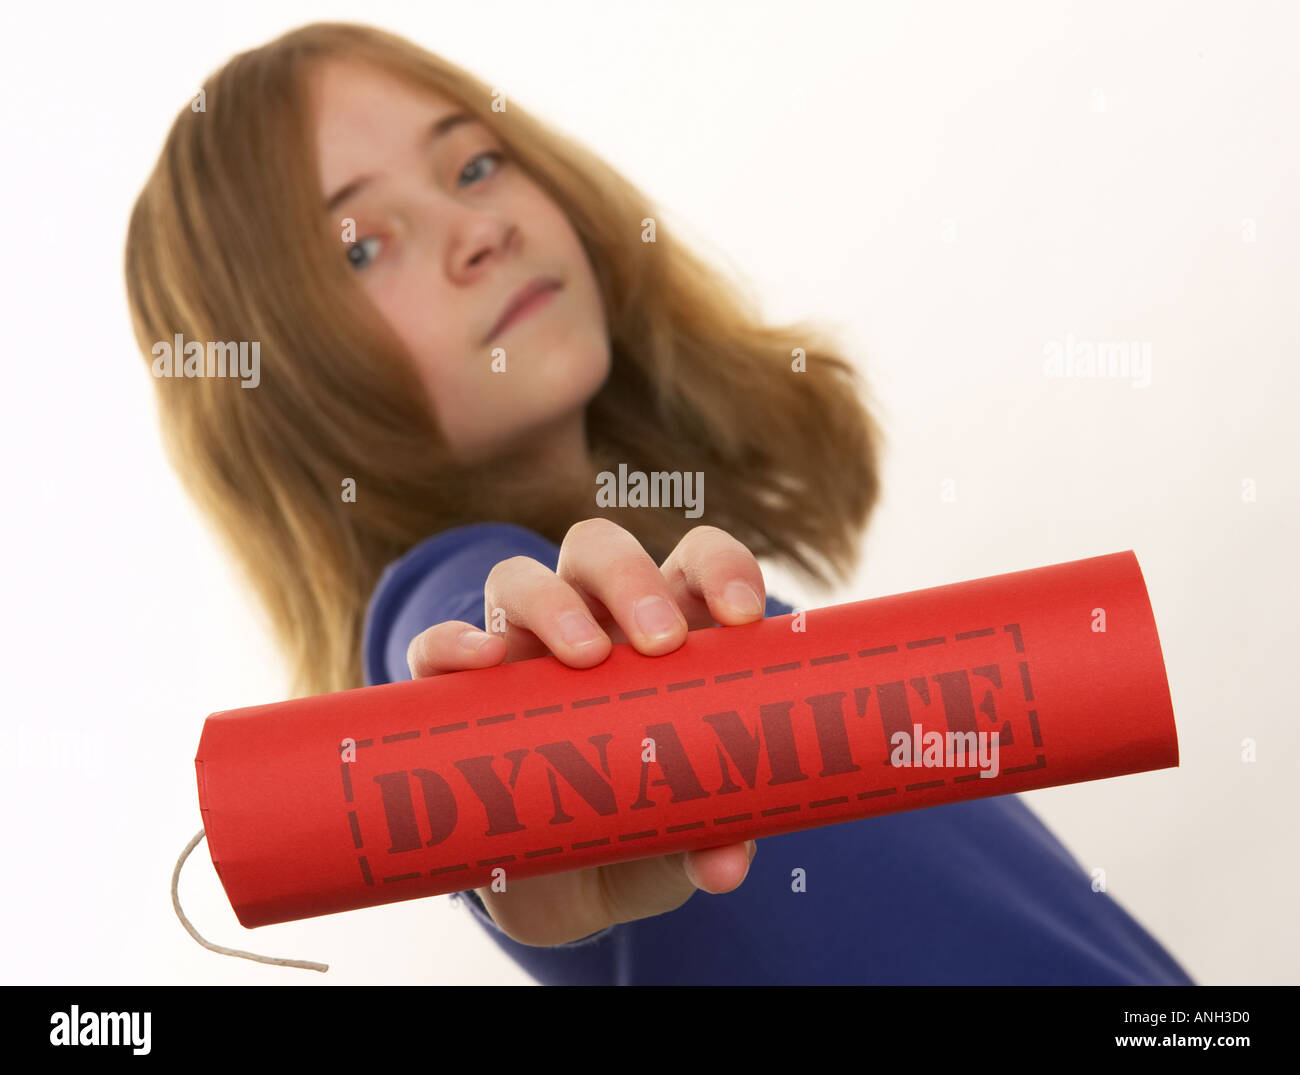 Young white girl holding dynamite stick Stock Photo